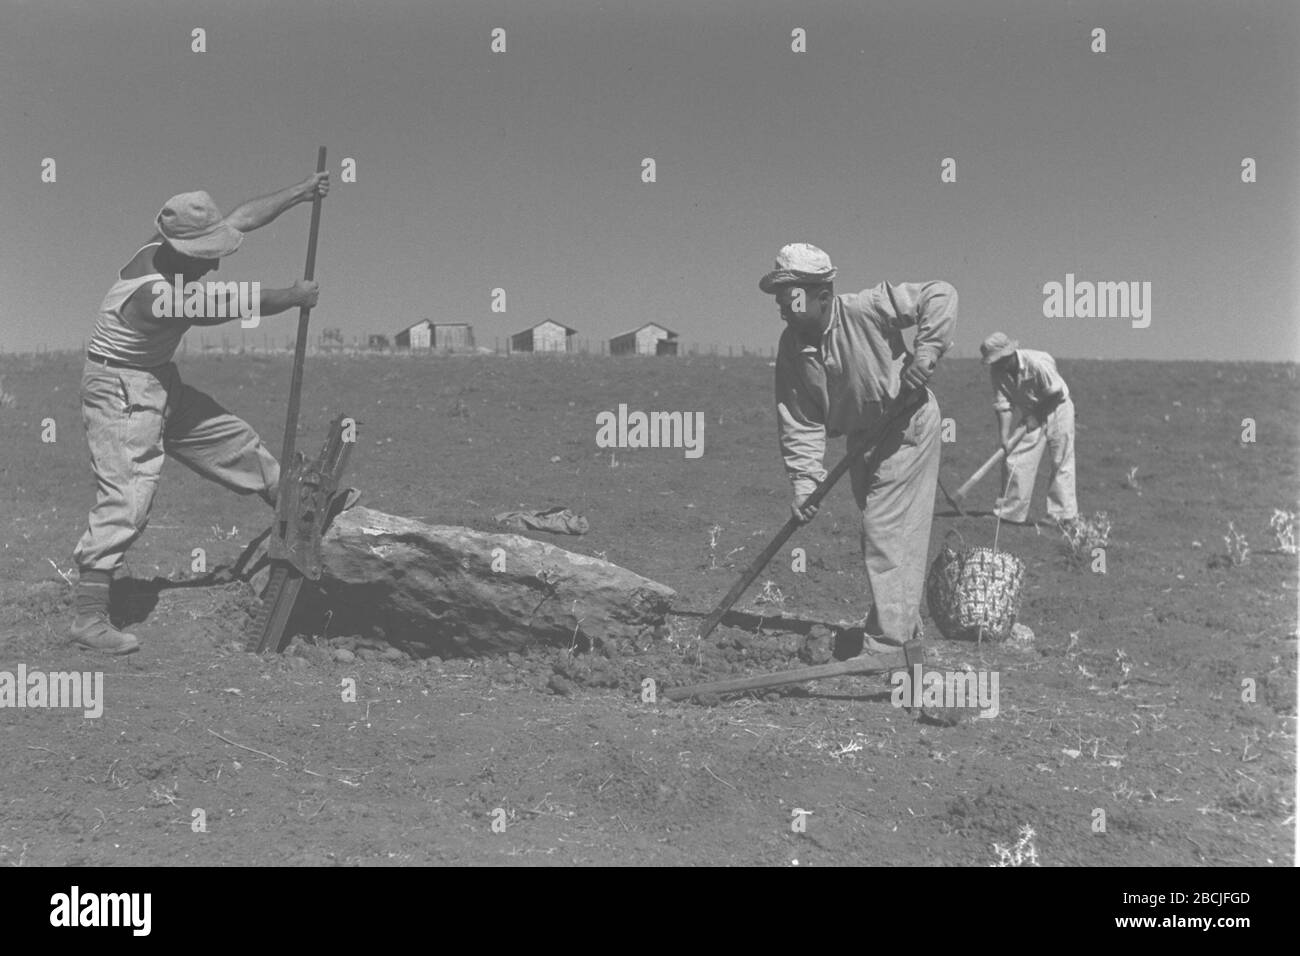 English Kibbutz Members Removing Stones From A Field Near Kibbutz Gal On O U I O U U O O C O U E I E I U I U C O U I C O Ss U E O E Ss O E I I U E I U 30 November 1946 This Is Available From